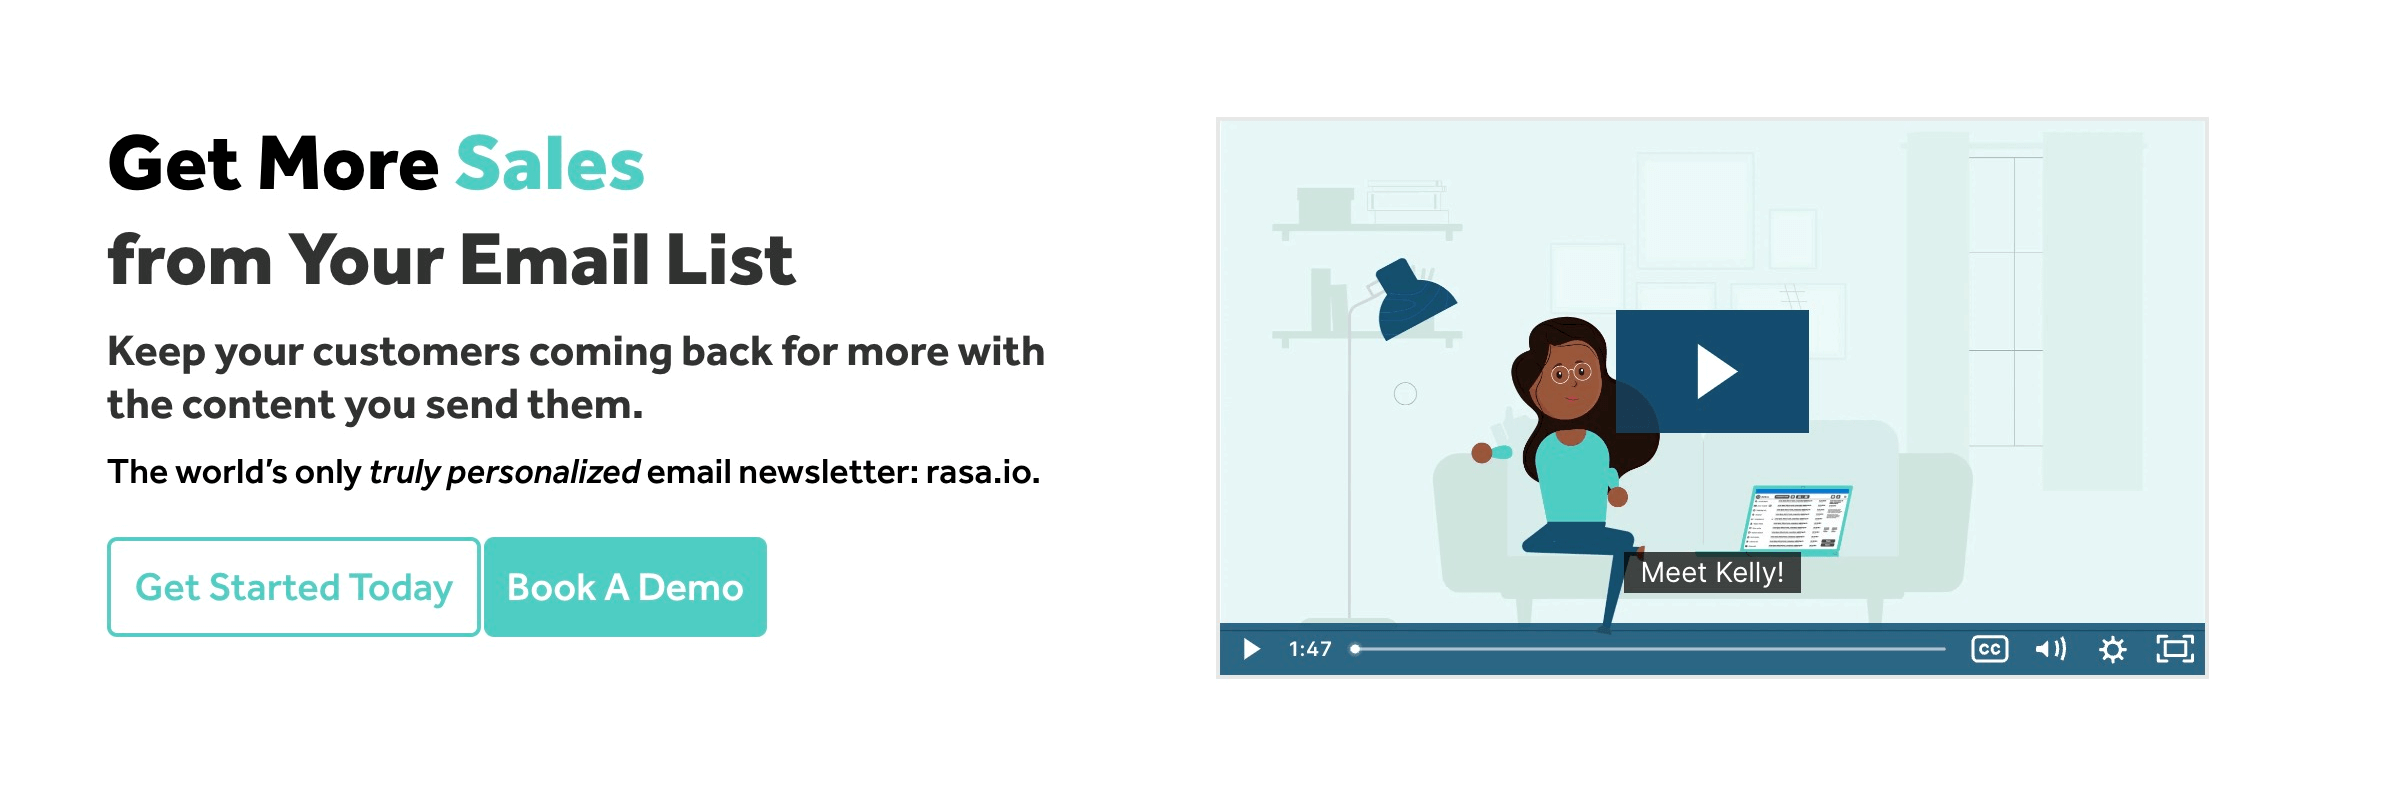 rasa.io's homepage boasts creating “the world’s only truly personalized email newsletters” and features a promotional video about an e-marketer named Kelly, who sends unique email to each of her subscribers